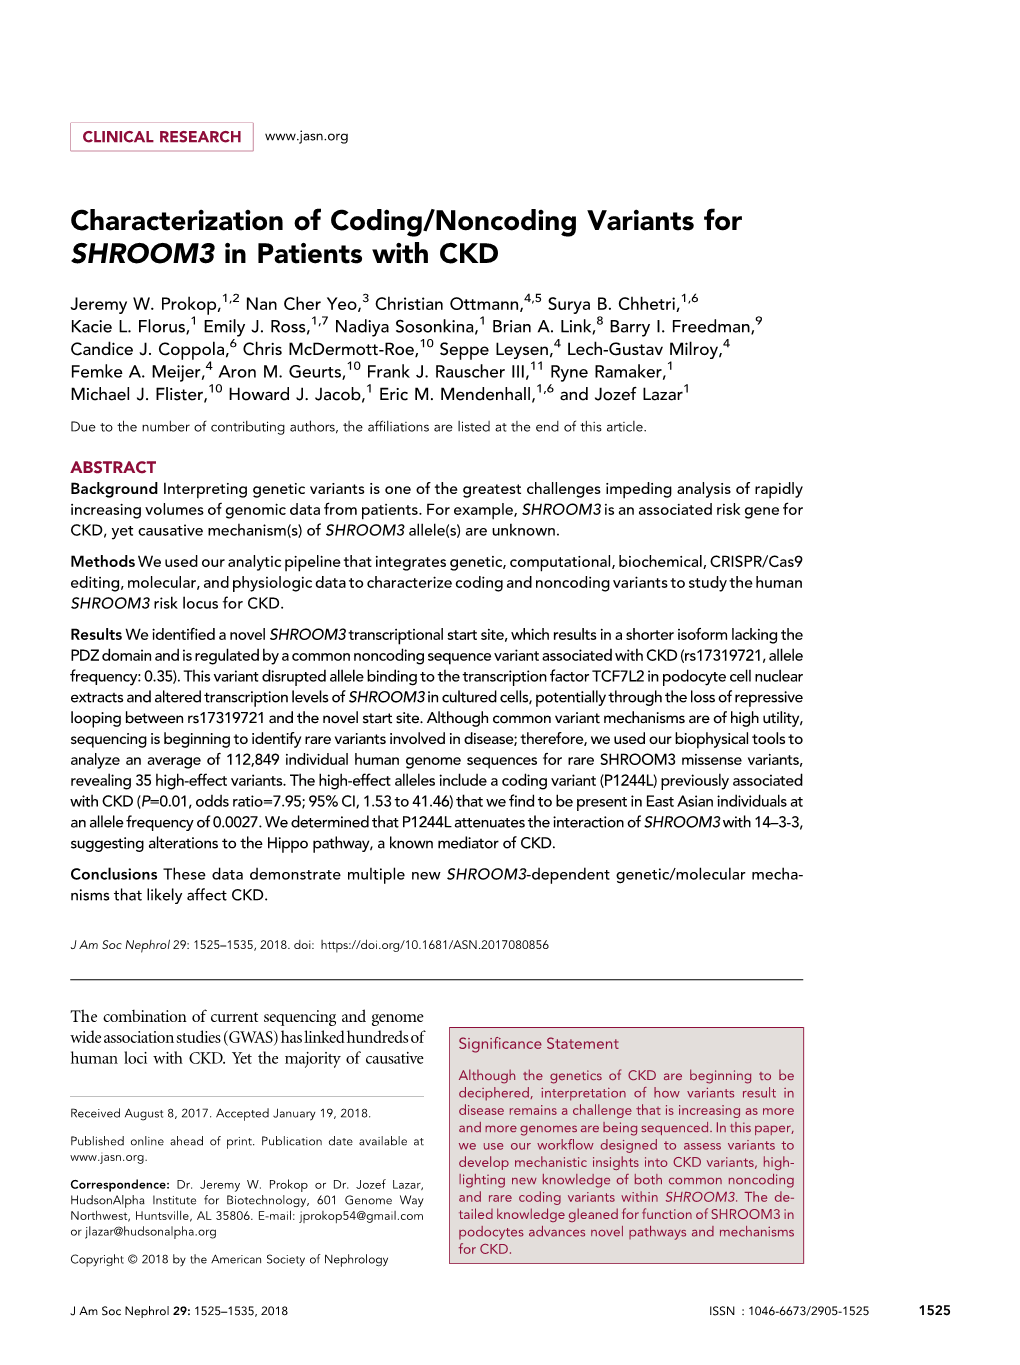 Characterization of Coding/Noncoding Variants for SHROOM3 in Patients with CKD